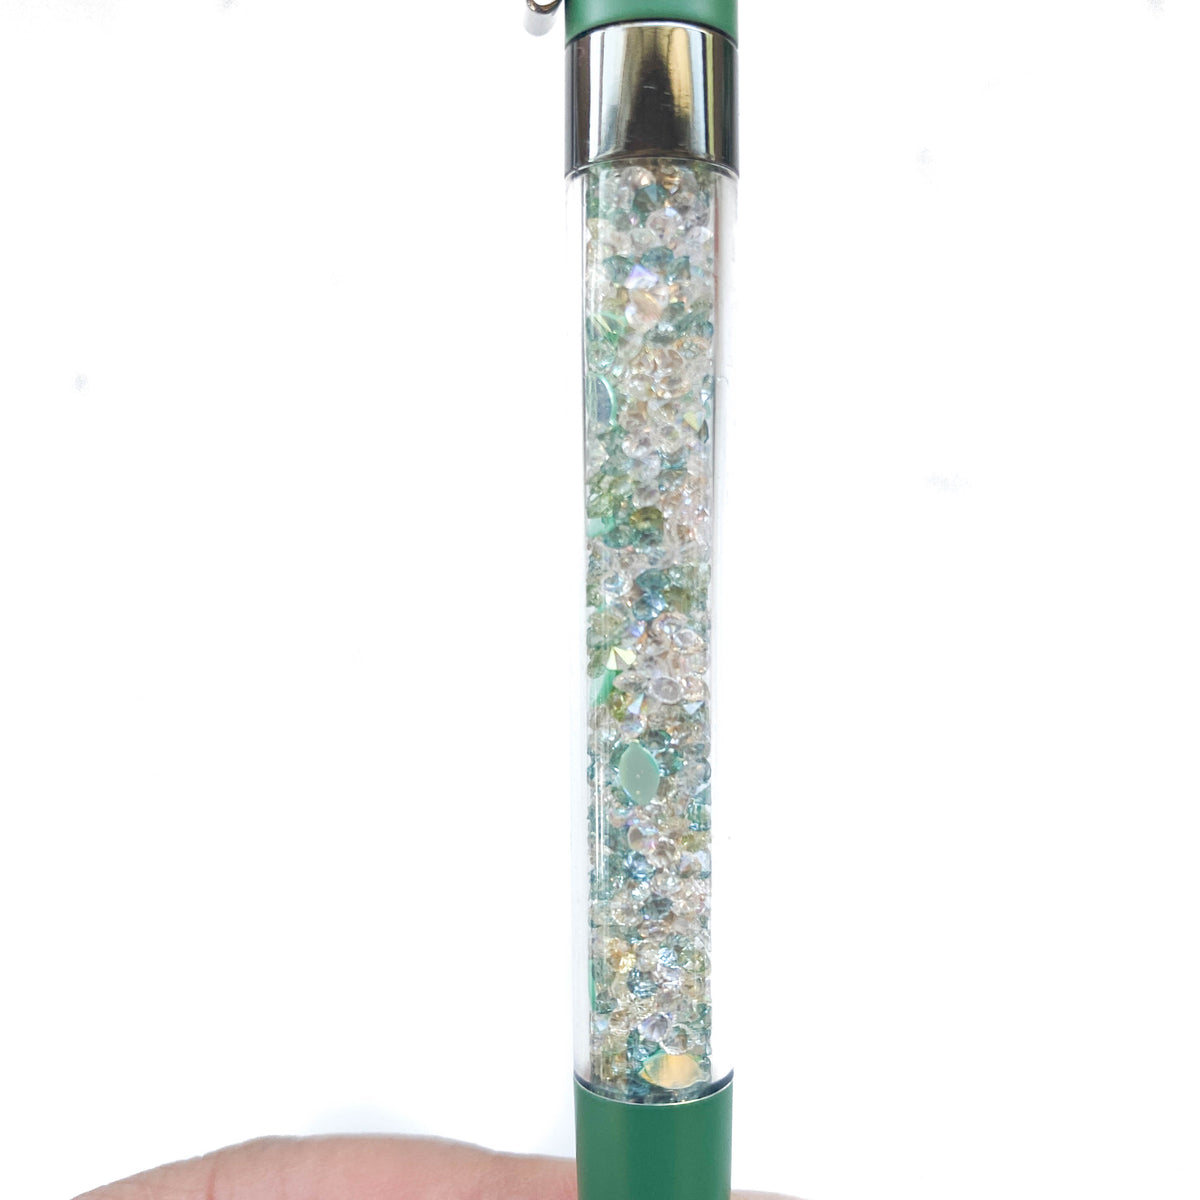 Plant Daddy Crystal VBPen | limited kit pen